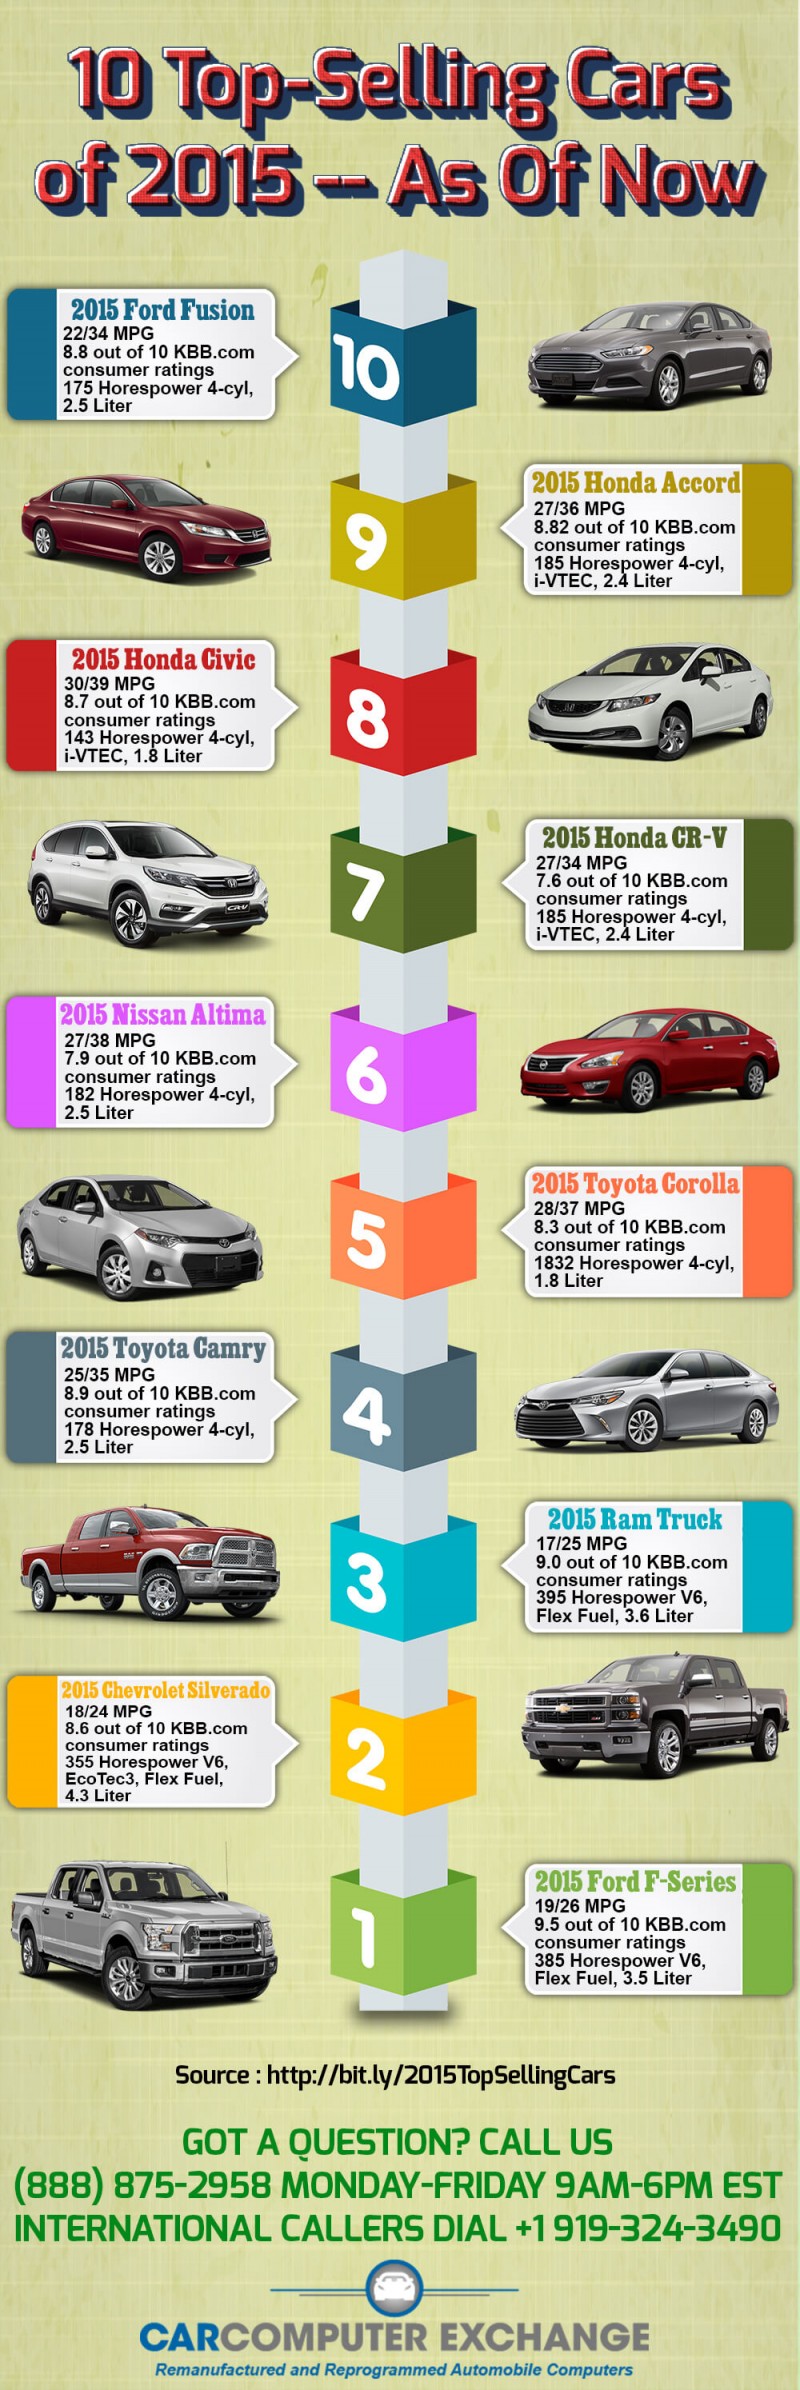 Top 10 Selling Cars of 2015 – As of Now [Infographic]